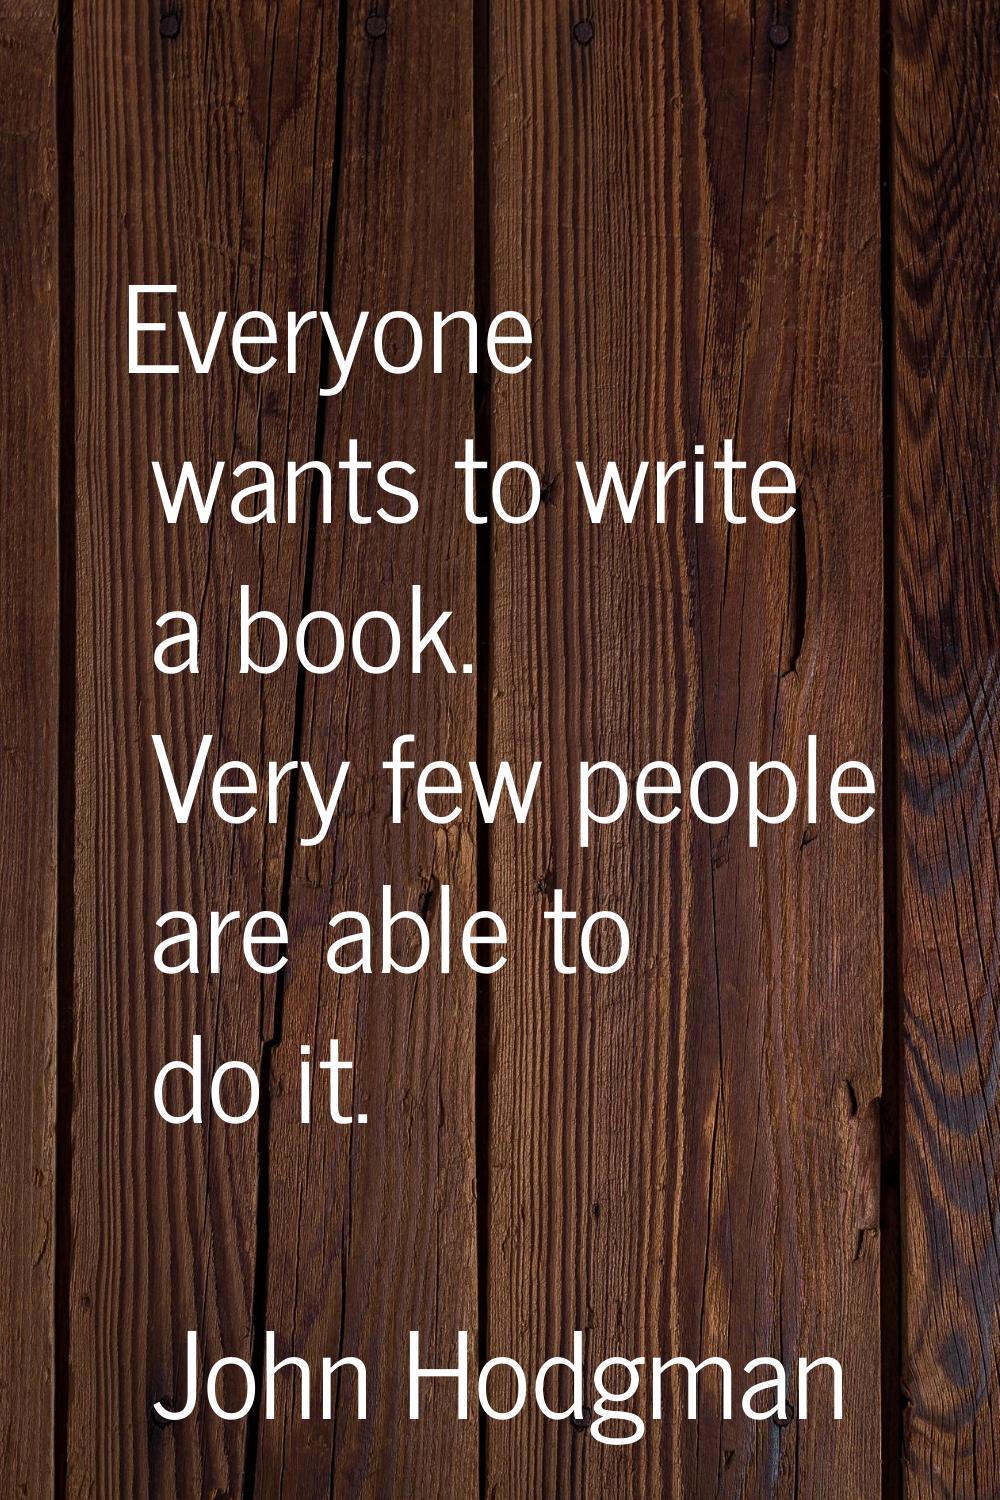 Everyone wants to write a book. Very few people are able to do it.